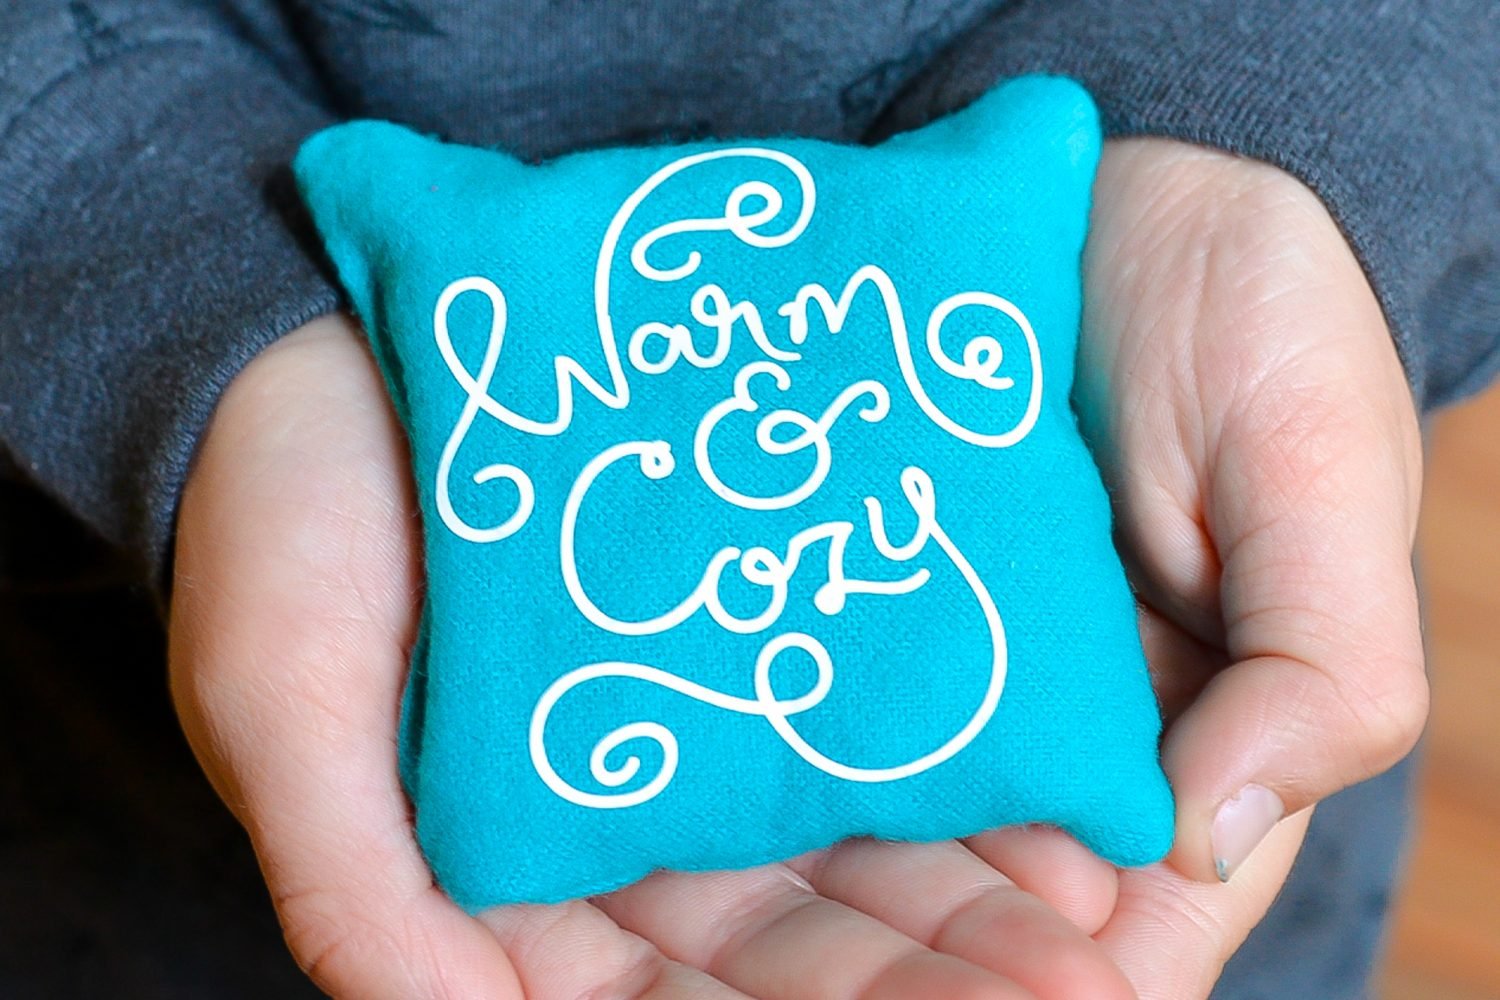 Image of person holding a small pillow like hand warmer